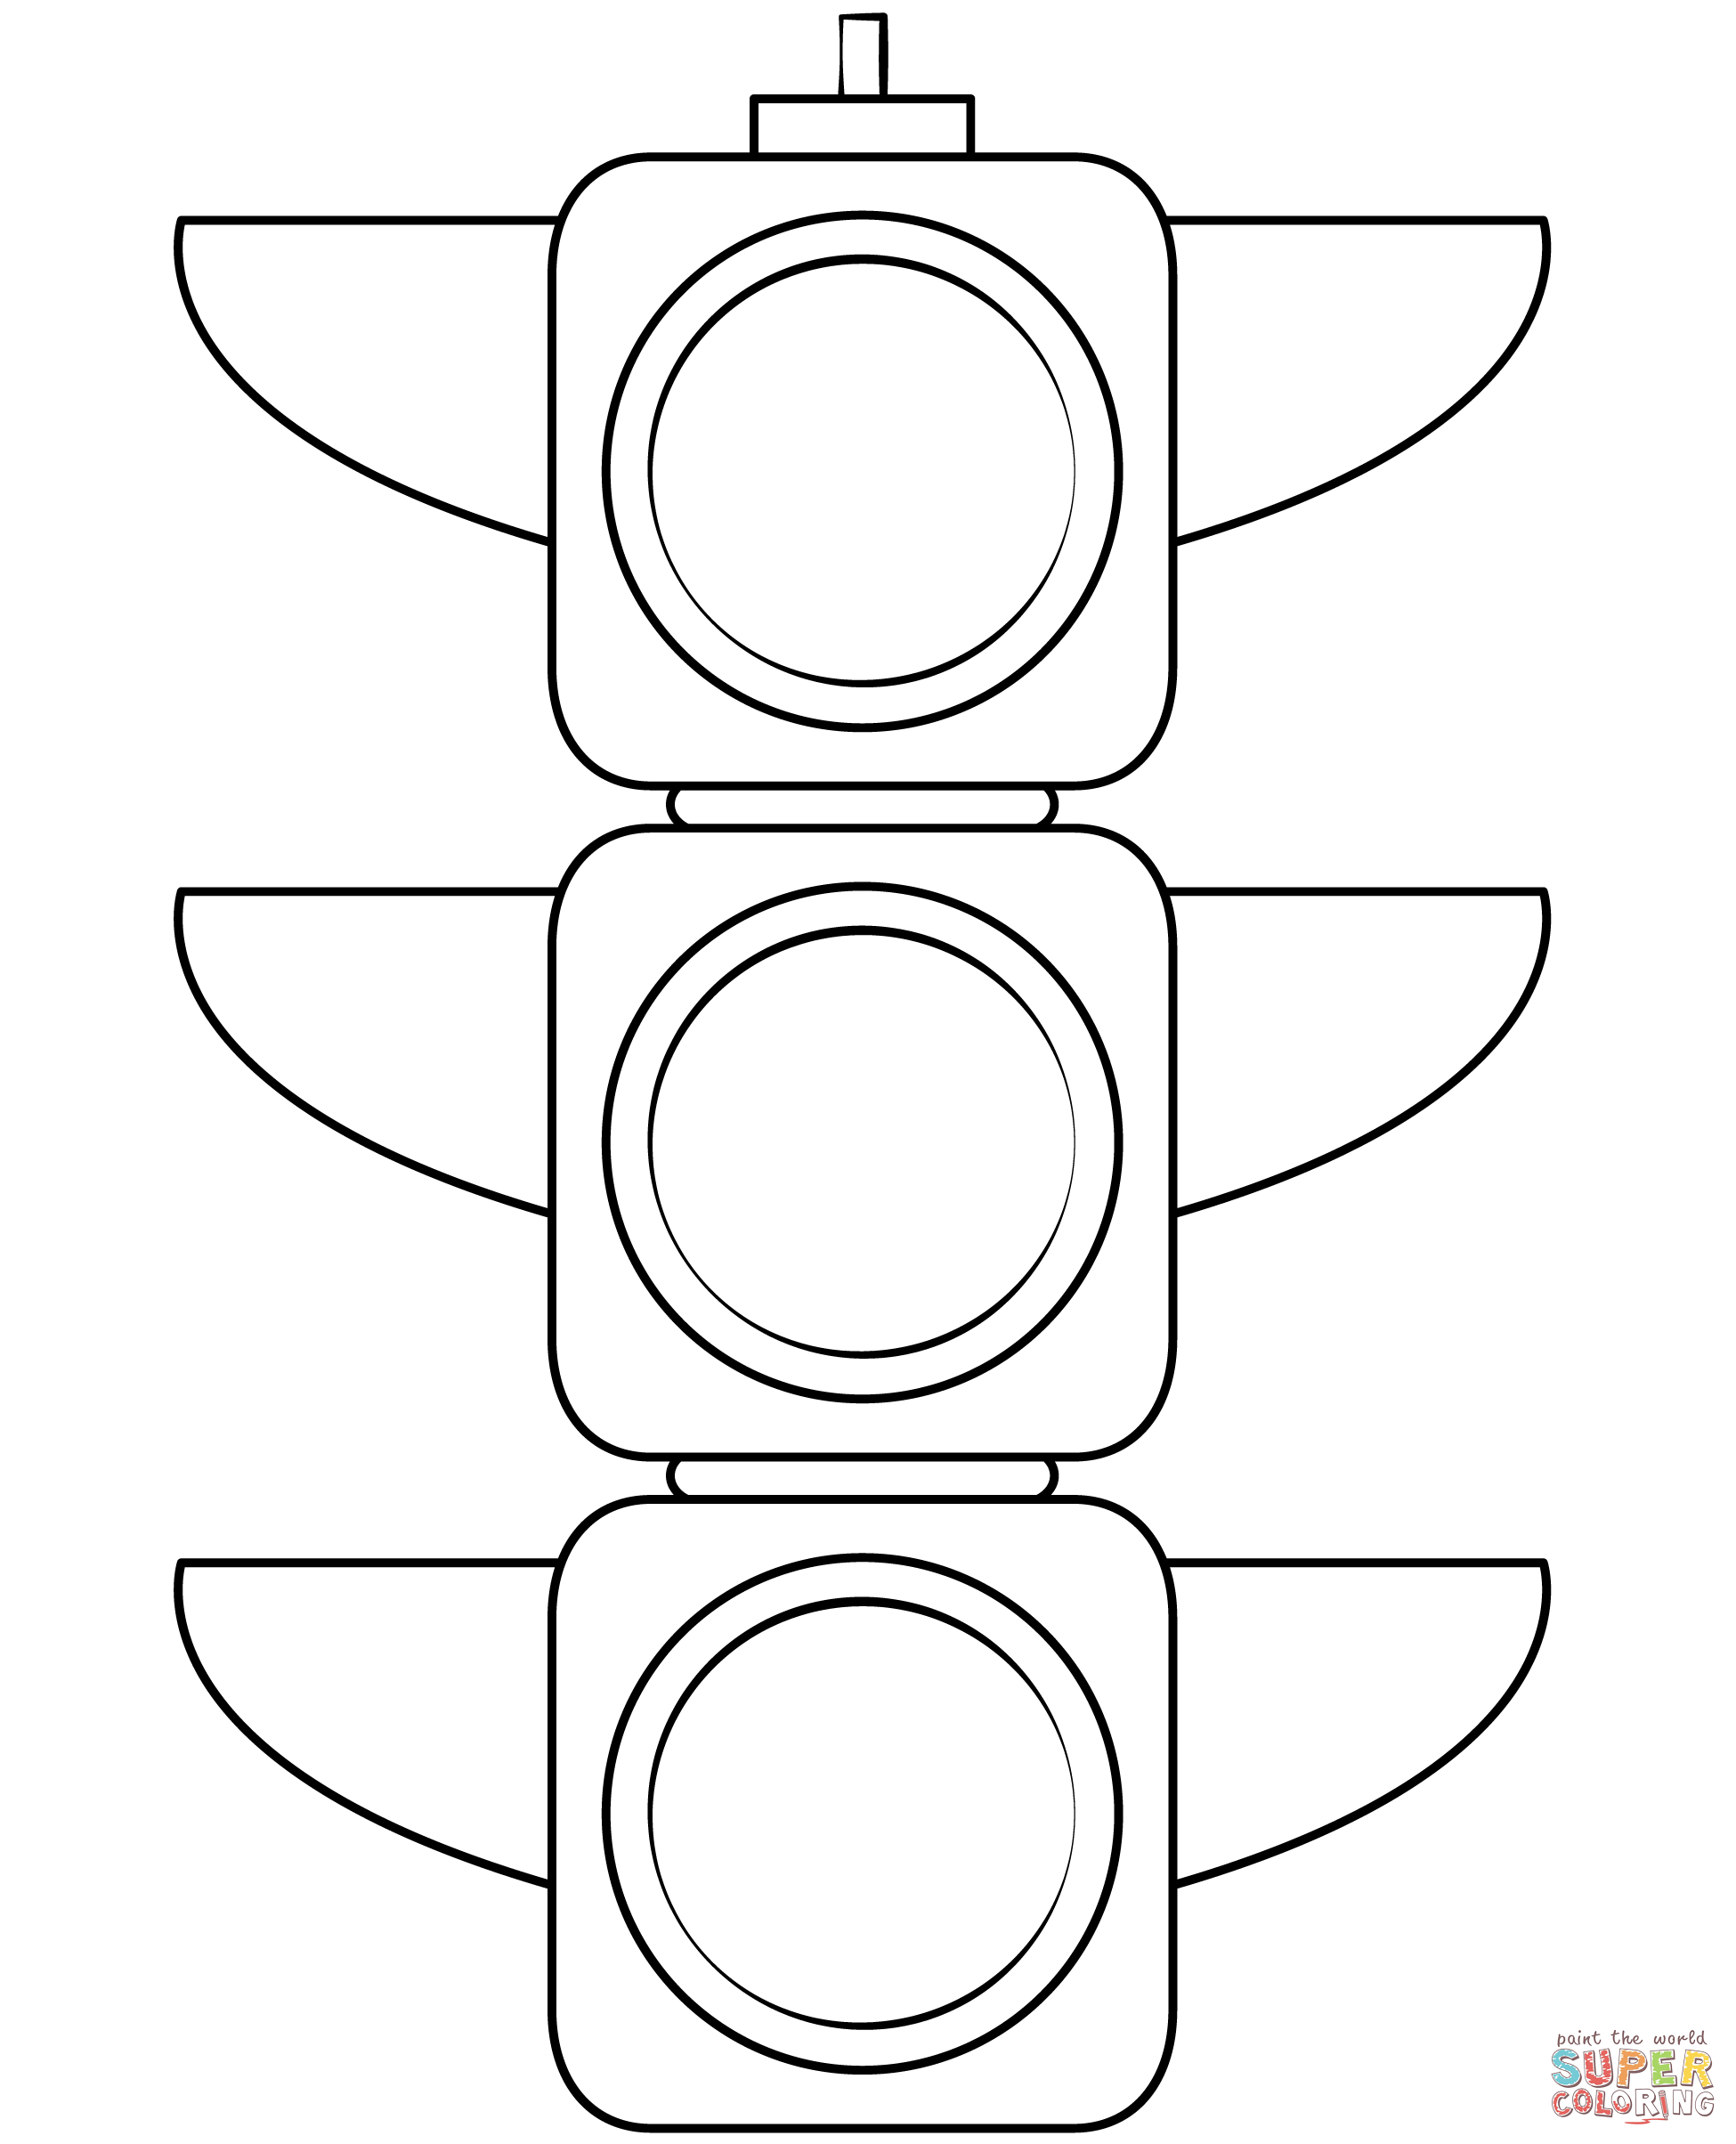 Traffic Light Coloring Page Free Printable Coloring Page Coloring Home